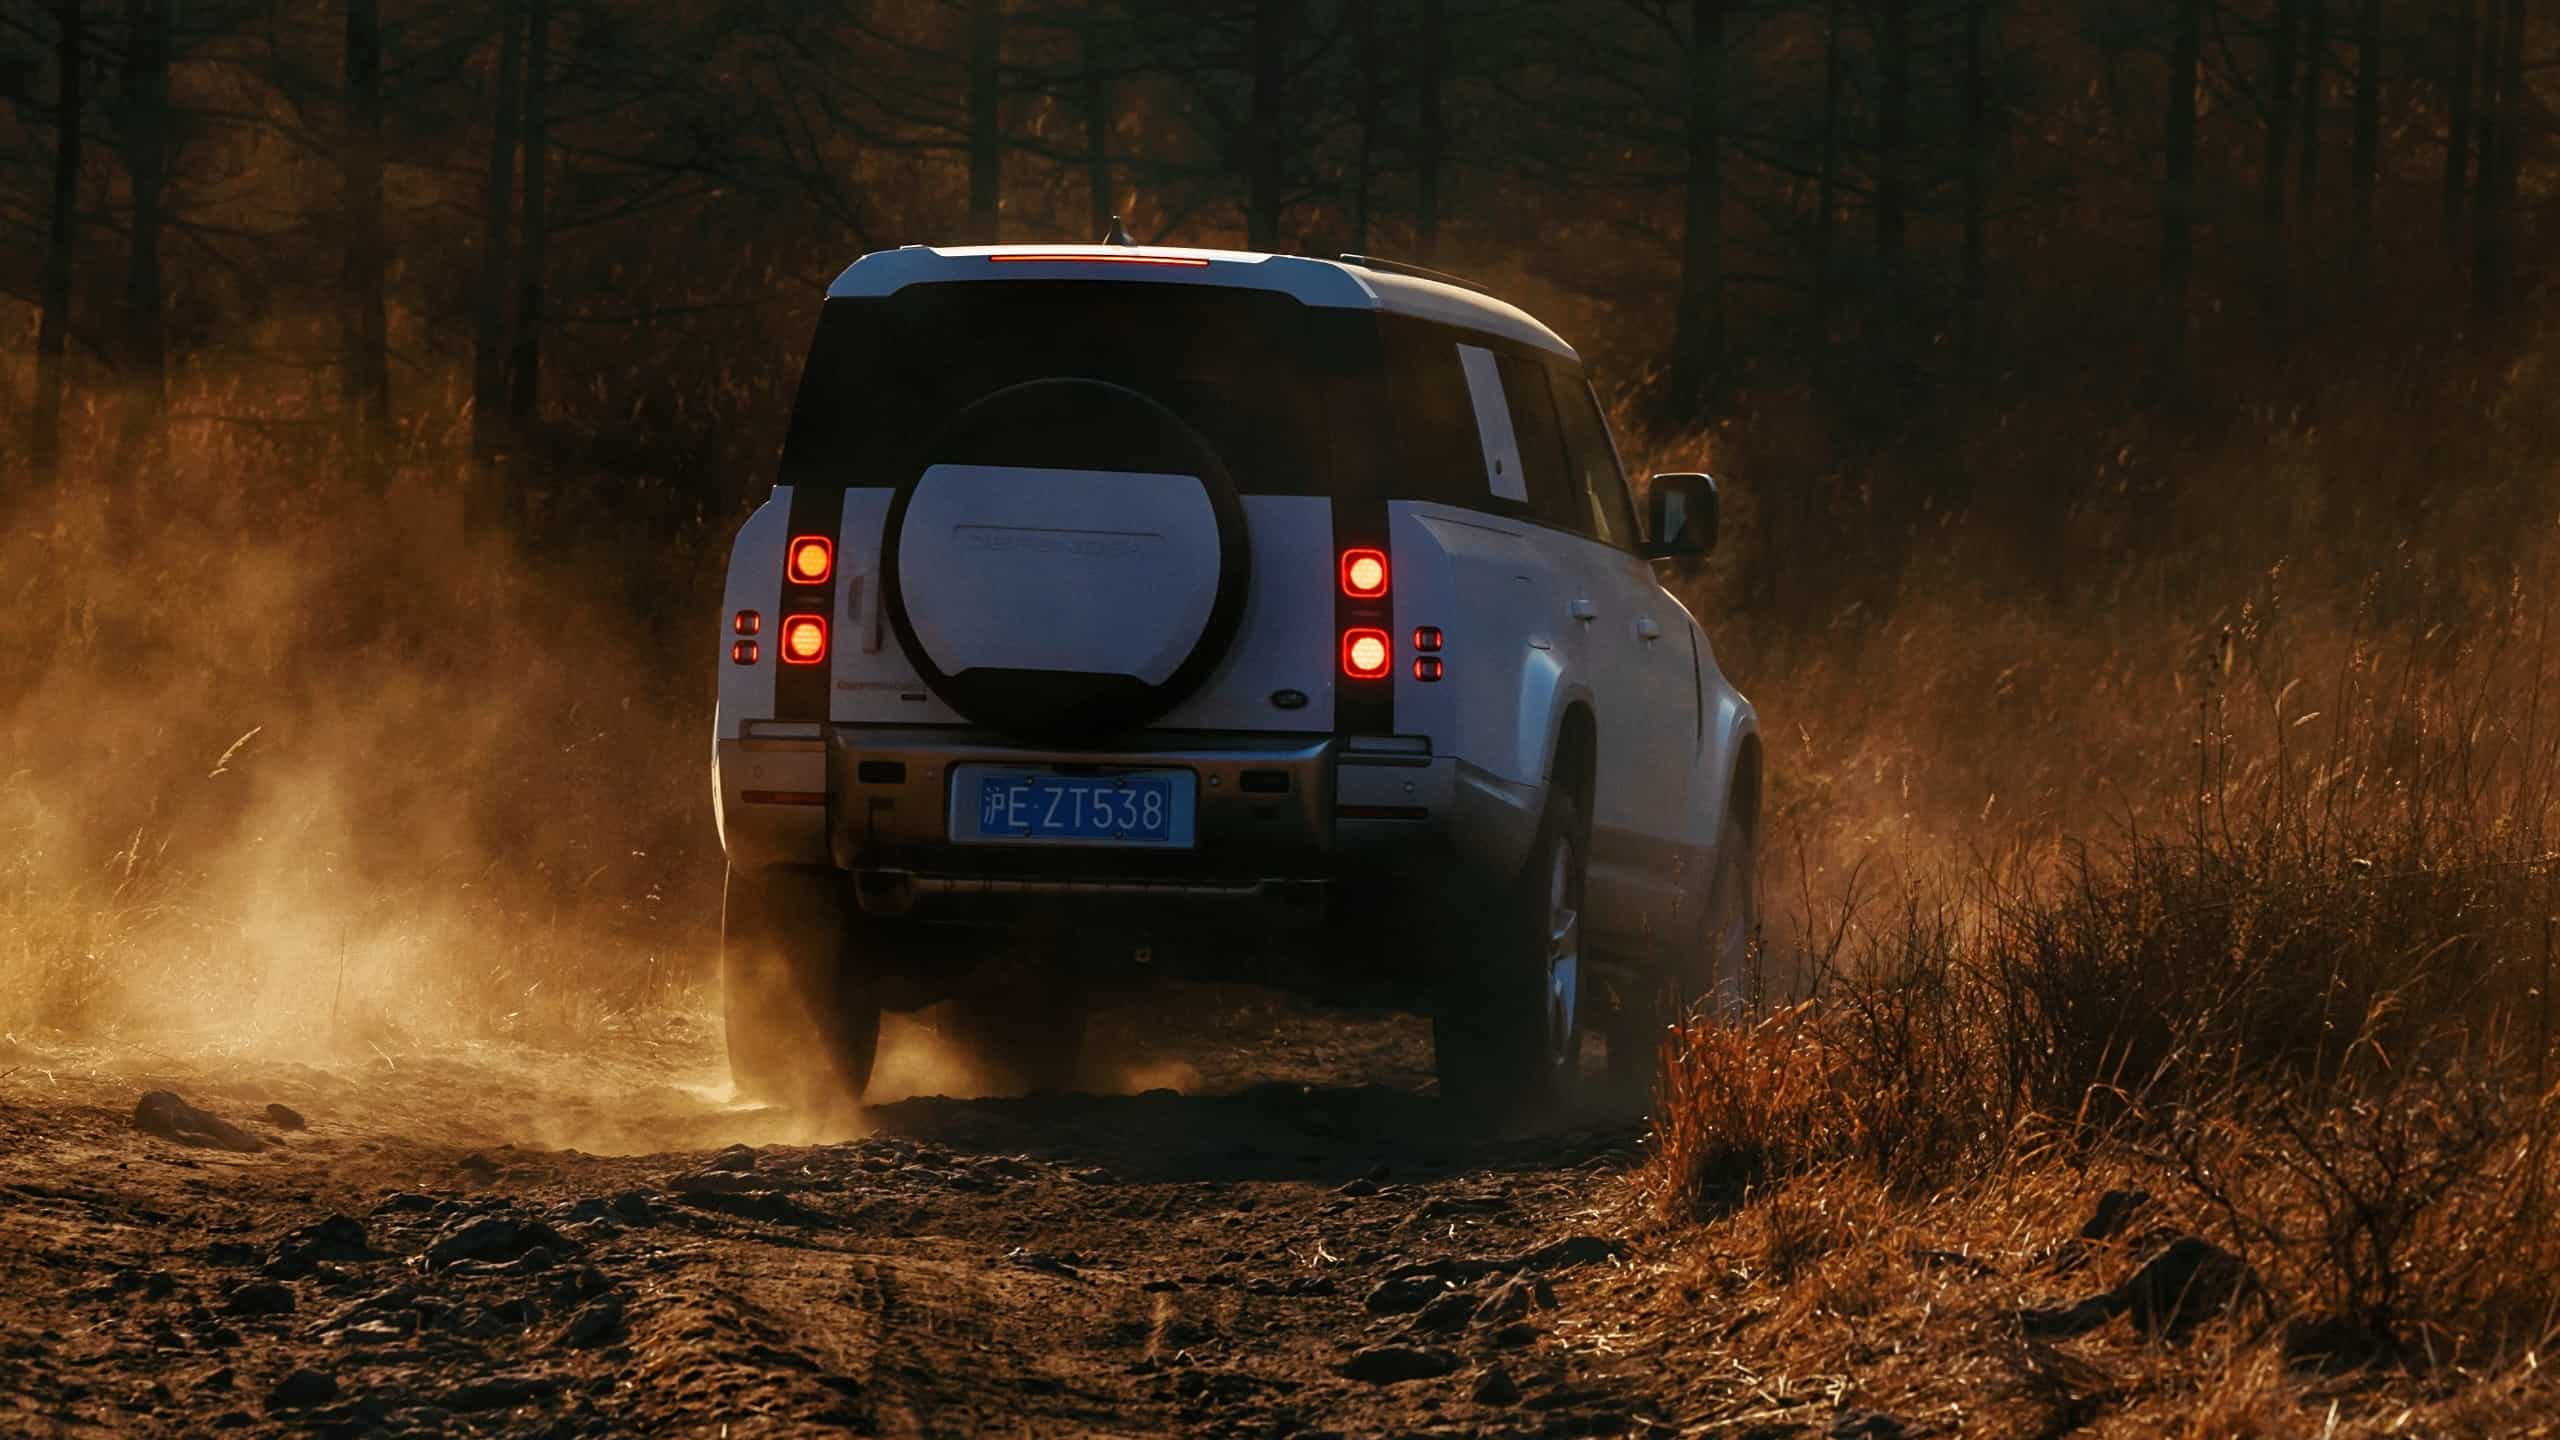 The new Land Rover Defender 130 calmly handles various road conditions